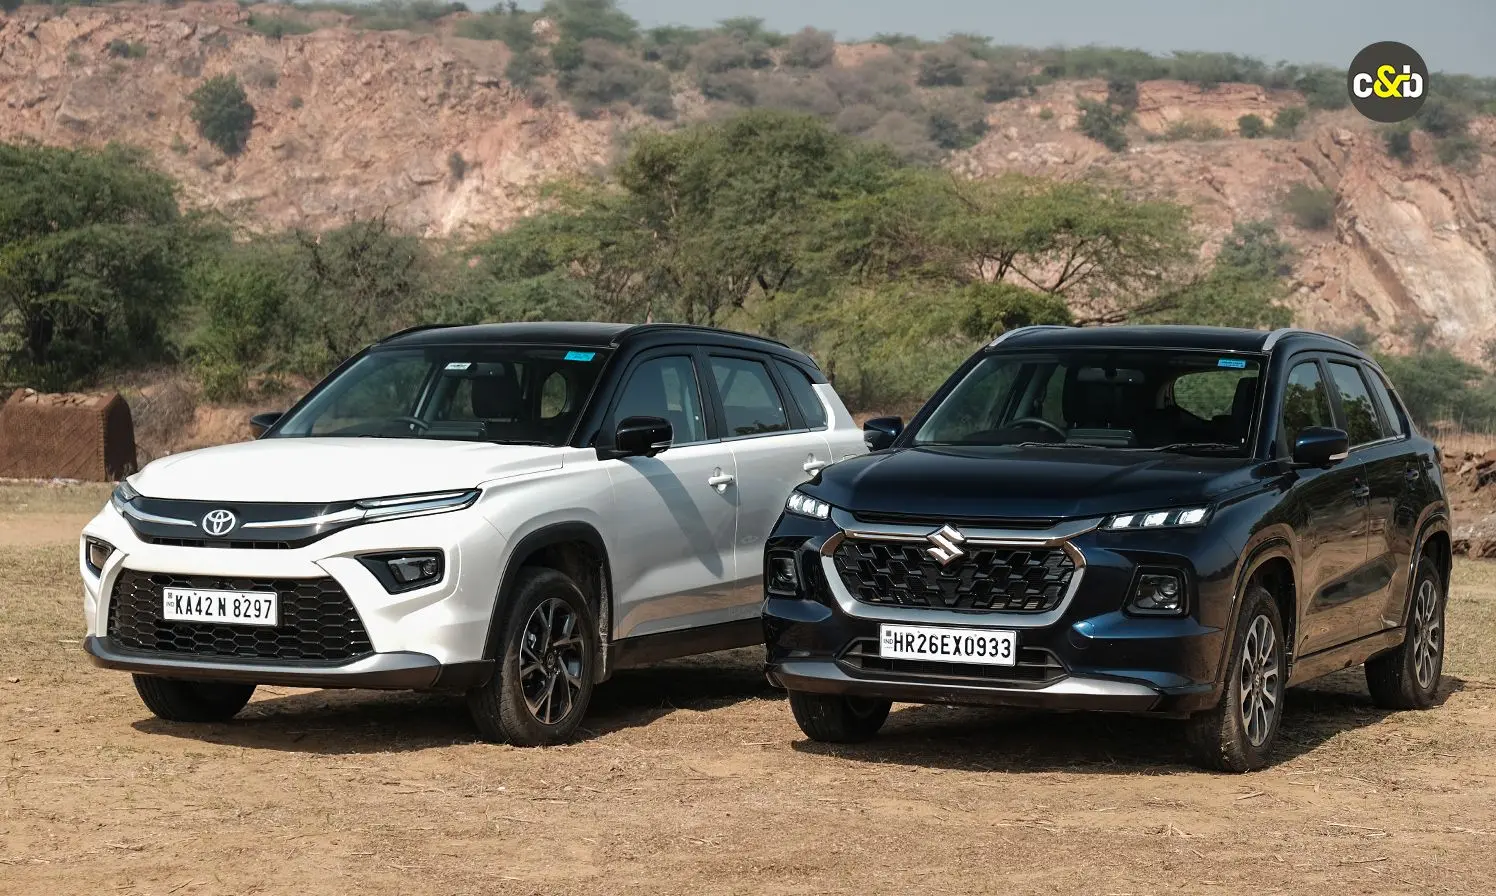 Both the Maruti Suzuki Grand Vitara and the Toyota Urban Cruiser HyRyder share similarities, and significant distinctions, but today we will help you make a more informed decision about which one to buy.